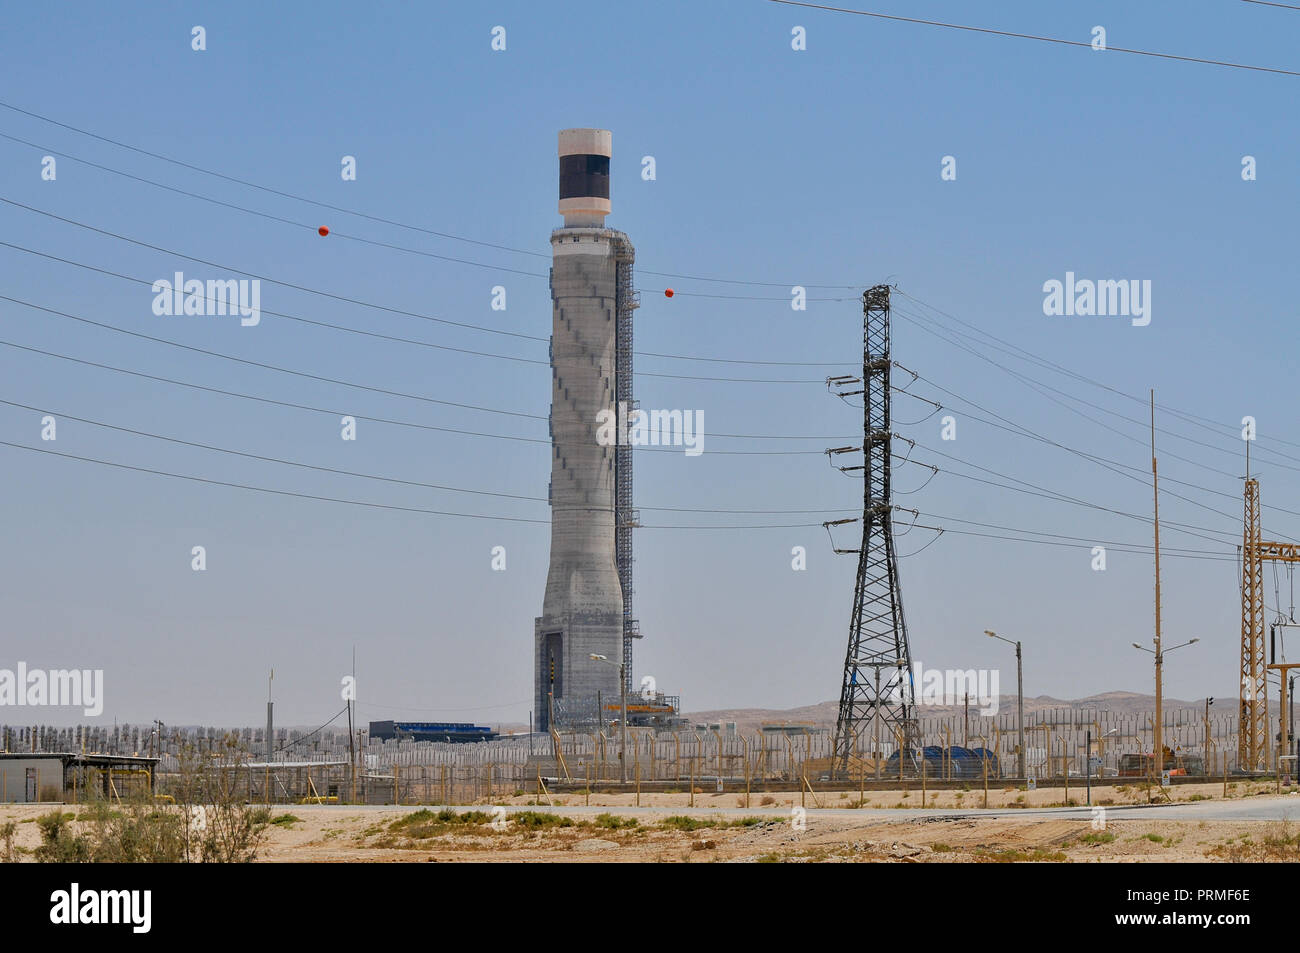 The Ashalim power station is a solar thermal power station in the Negev desert near the kibbutz of Ashalim, in Israel. The station will provide 121 Me Stock Photo